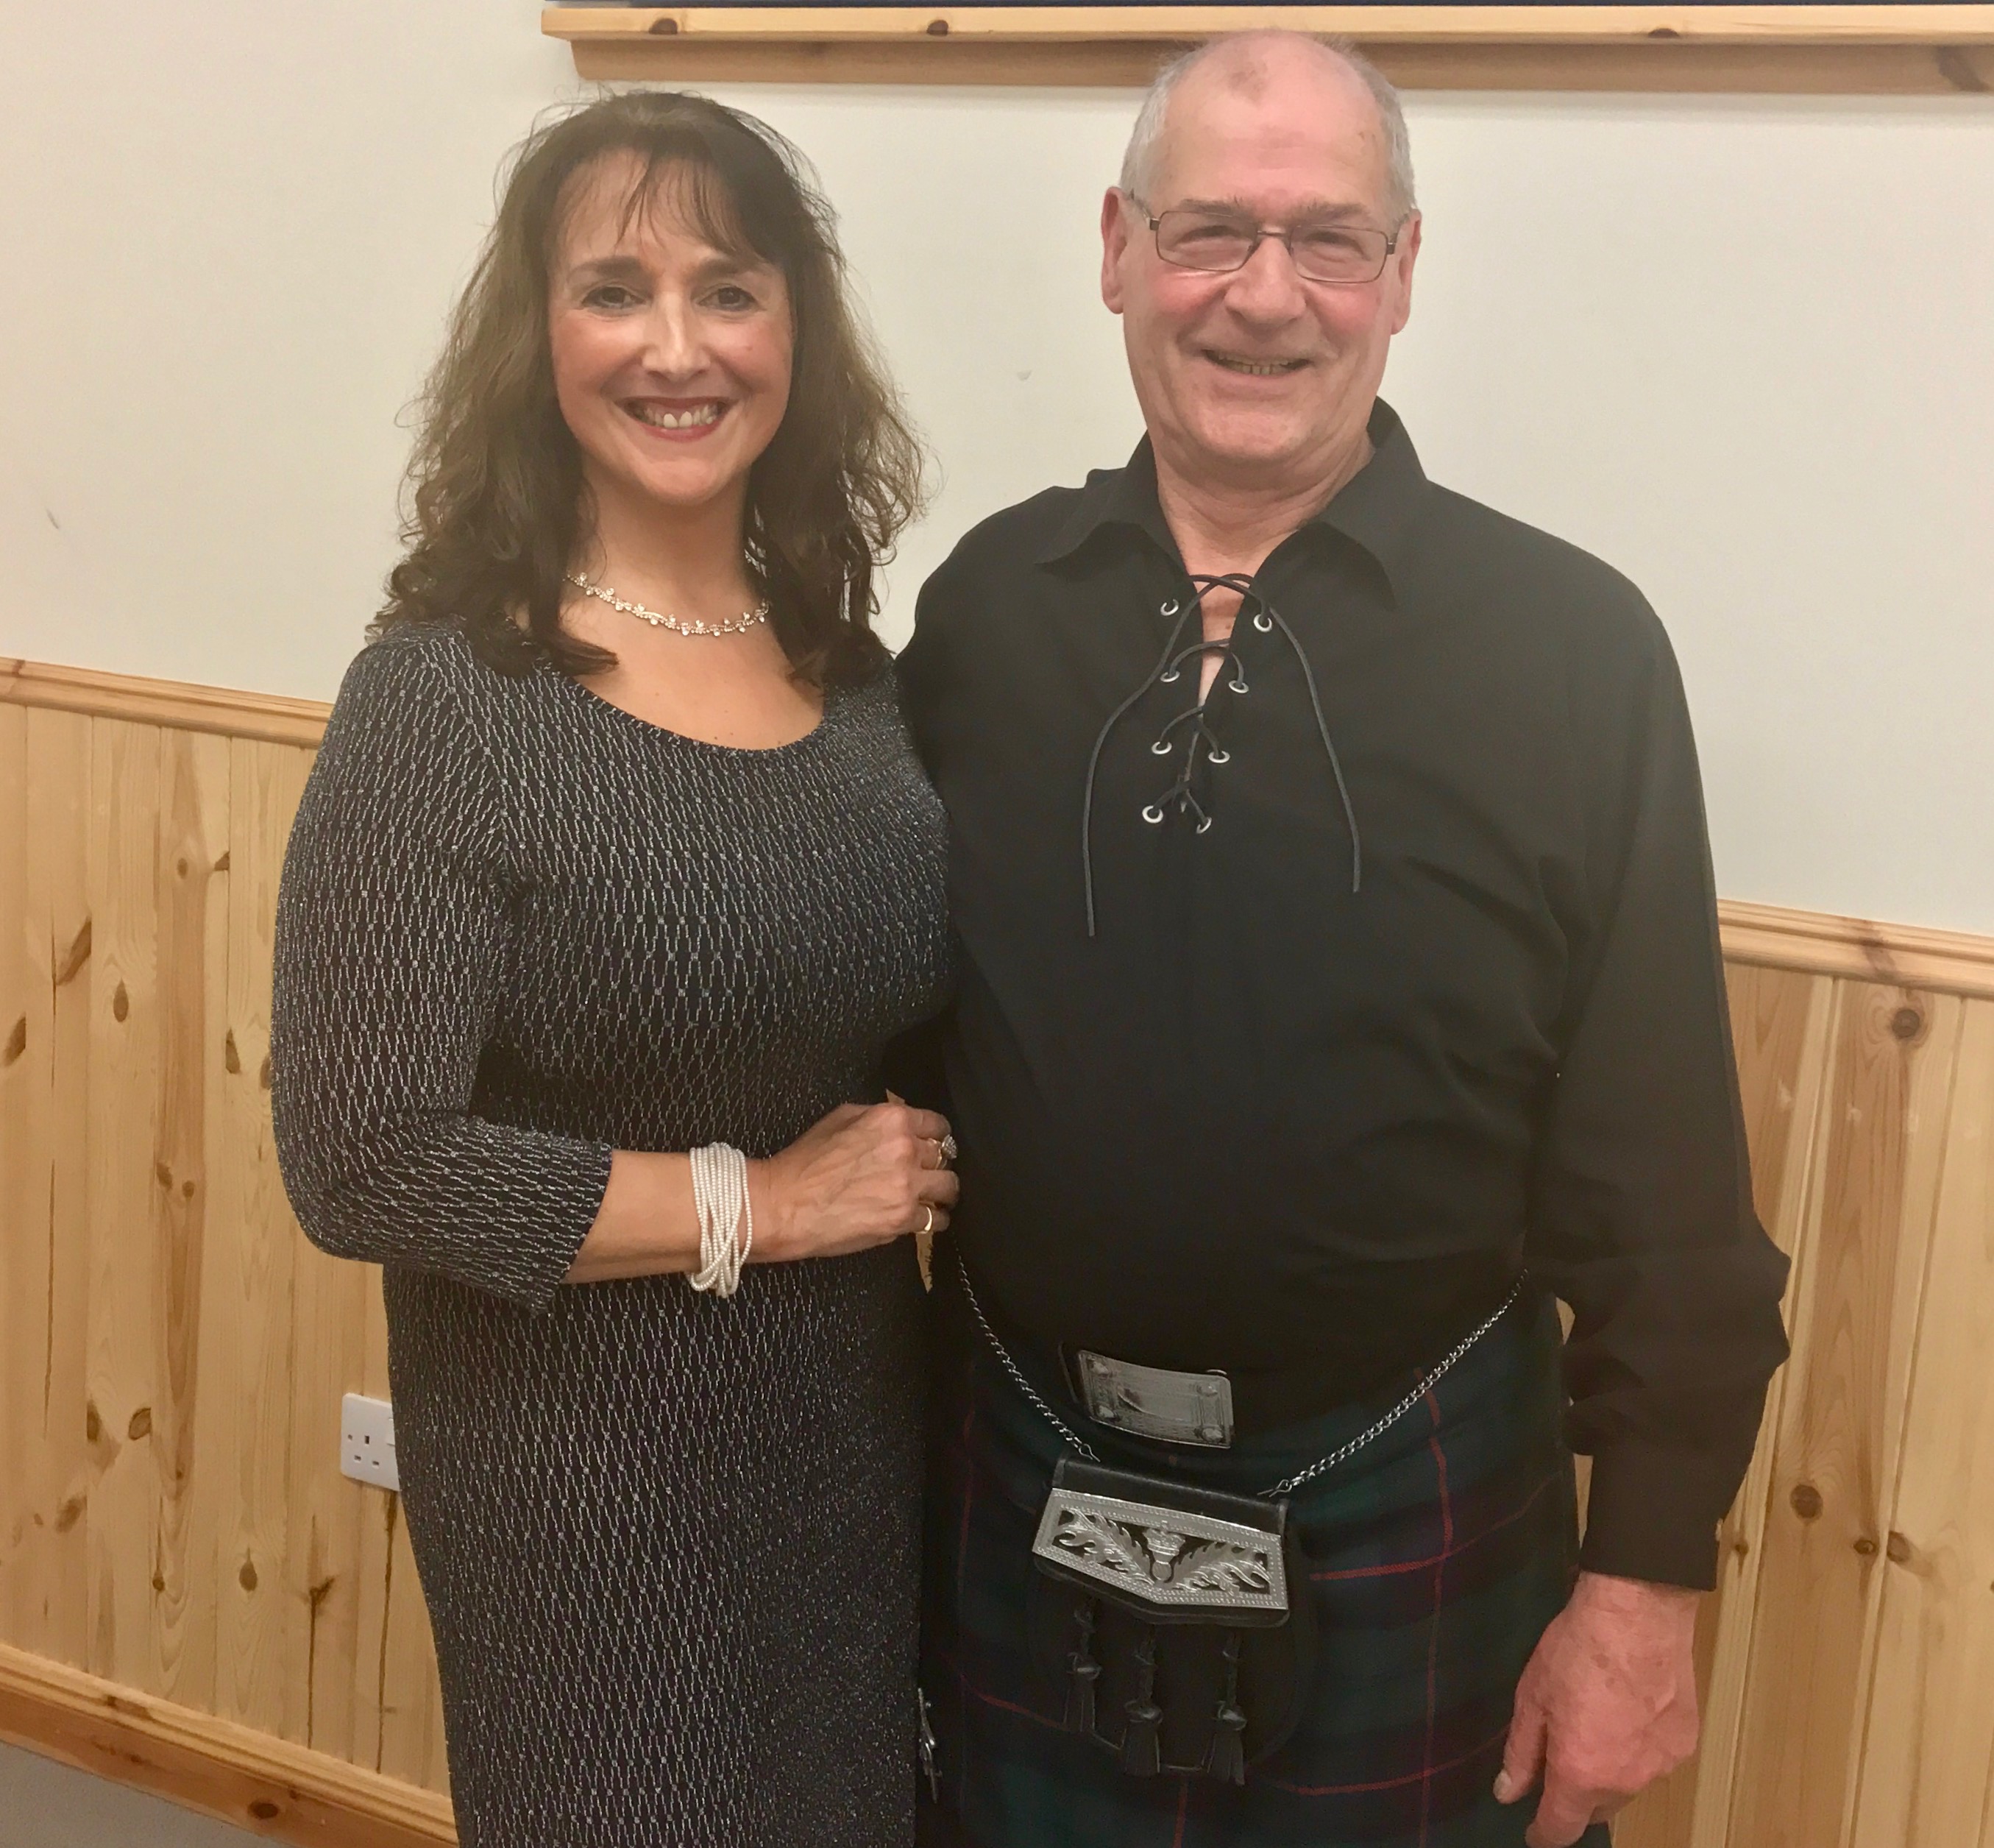 Pictured with Normas Masson, Chairman of Daviot Burns' Supper.